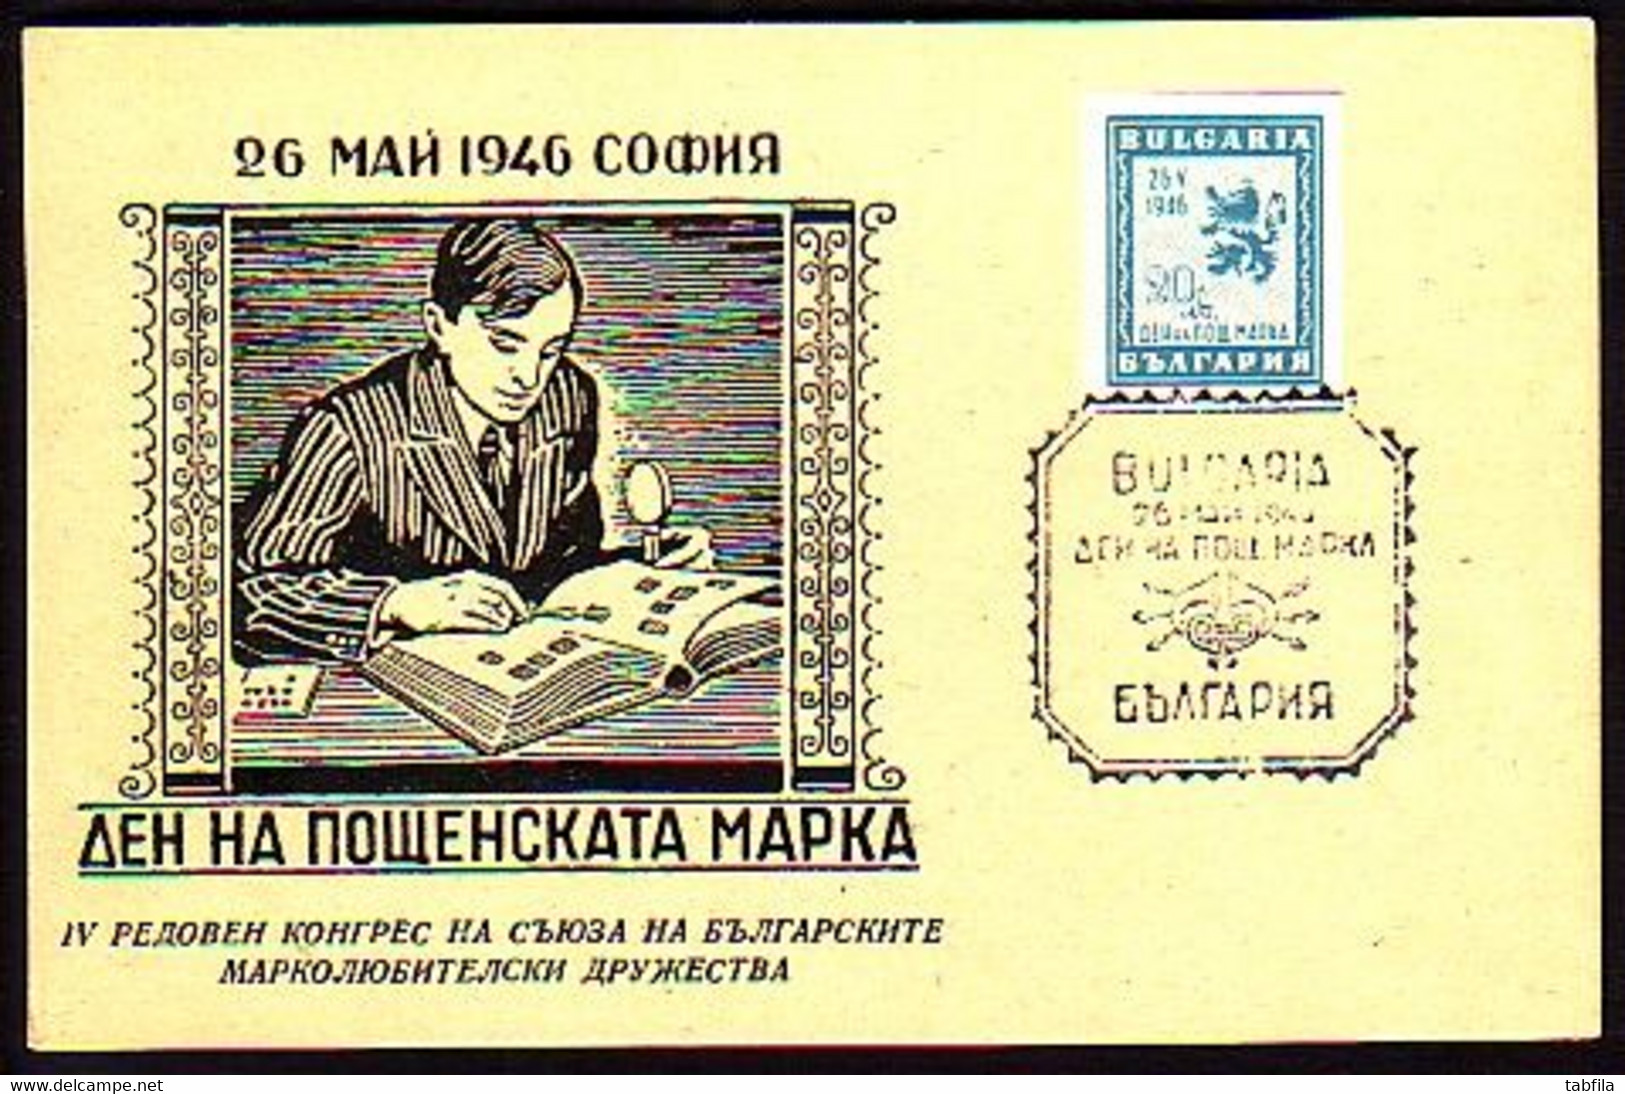 BULGARIA  - 1946 - Postage Stamp Day - P.card Spec Cache - Postcards